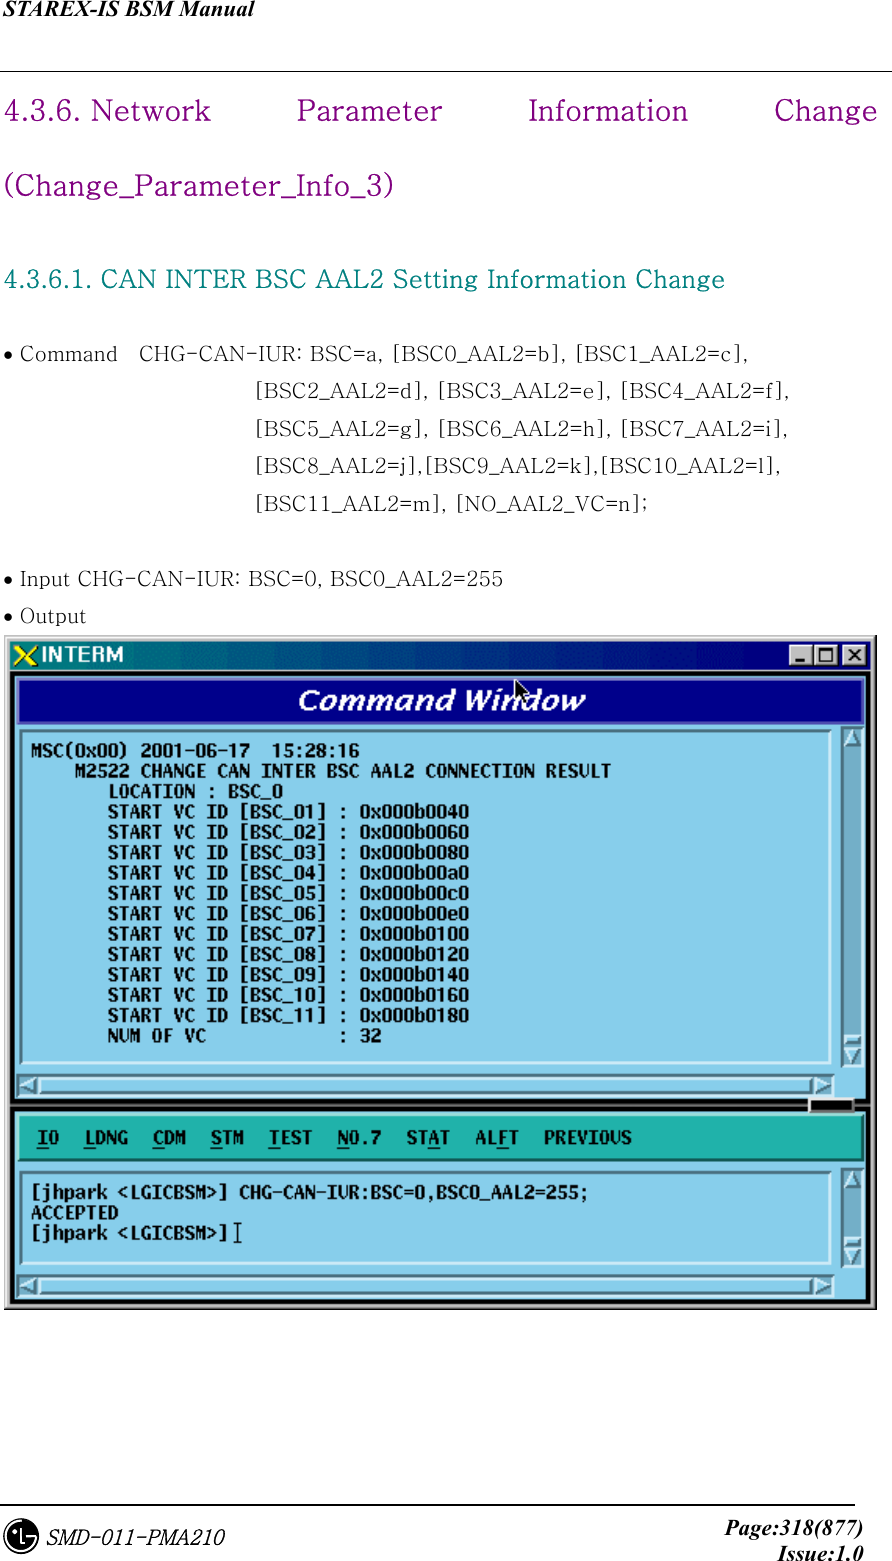 STAREX-IS BSM Manual     Page:318(877)Issue:1.0SMD-011-PMA210 4.3.6. Network  Parameter Information Change (Change_Parameter_Info_3)  4.3.6.1. CAN INTER BSC AAL2 Setting Information Change  • Command    CHG-CAN-IUR: BSC=a, [BSC0_AAL2=b], [BSC1_AAL2=c],   [BSC2_AAL2=d], [BSC3_AAL2=e], [BSC4_AAL2=f],   [BSC5_AAL2=g], [BSC6_AAL2=h], [BSC7_AAL2=i],   [BSC8_AAL2=j],[BSC9_AAL2=k],[BSC10_AAL2=l], [BSC11_AAL2=m], [NO_AAL2_VC=n];    • Input CHG-CAN-IUR: BSC=0, BSC0_AAL2=255 • Output  